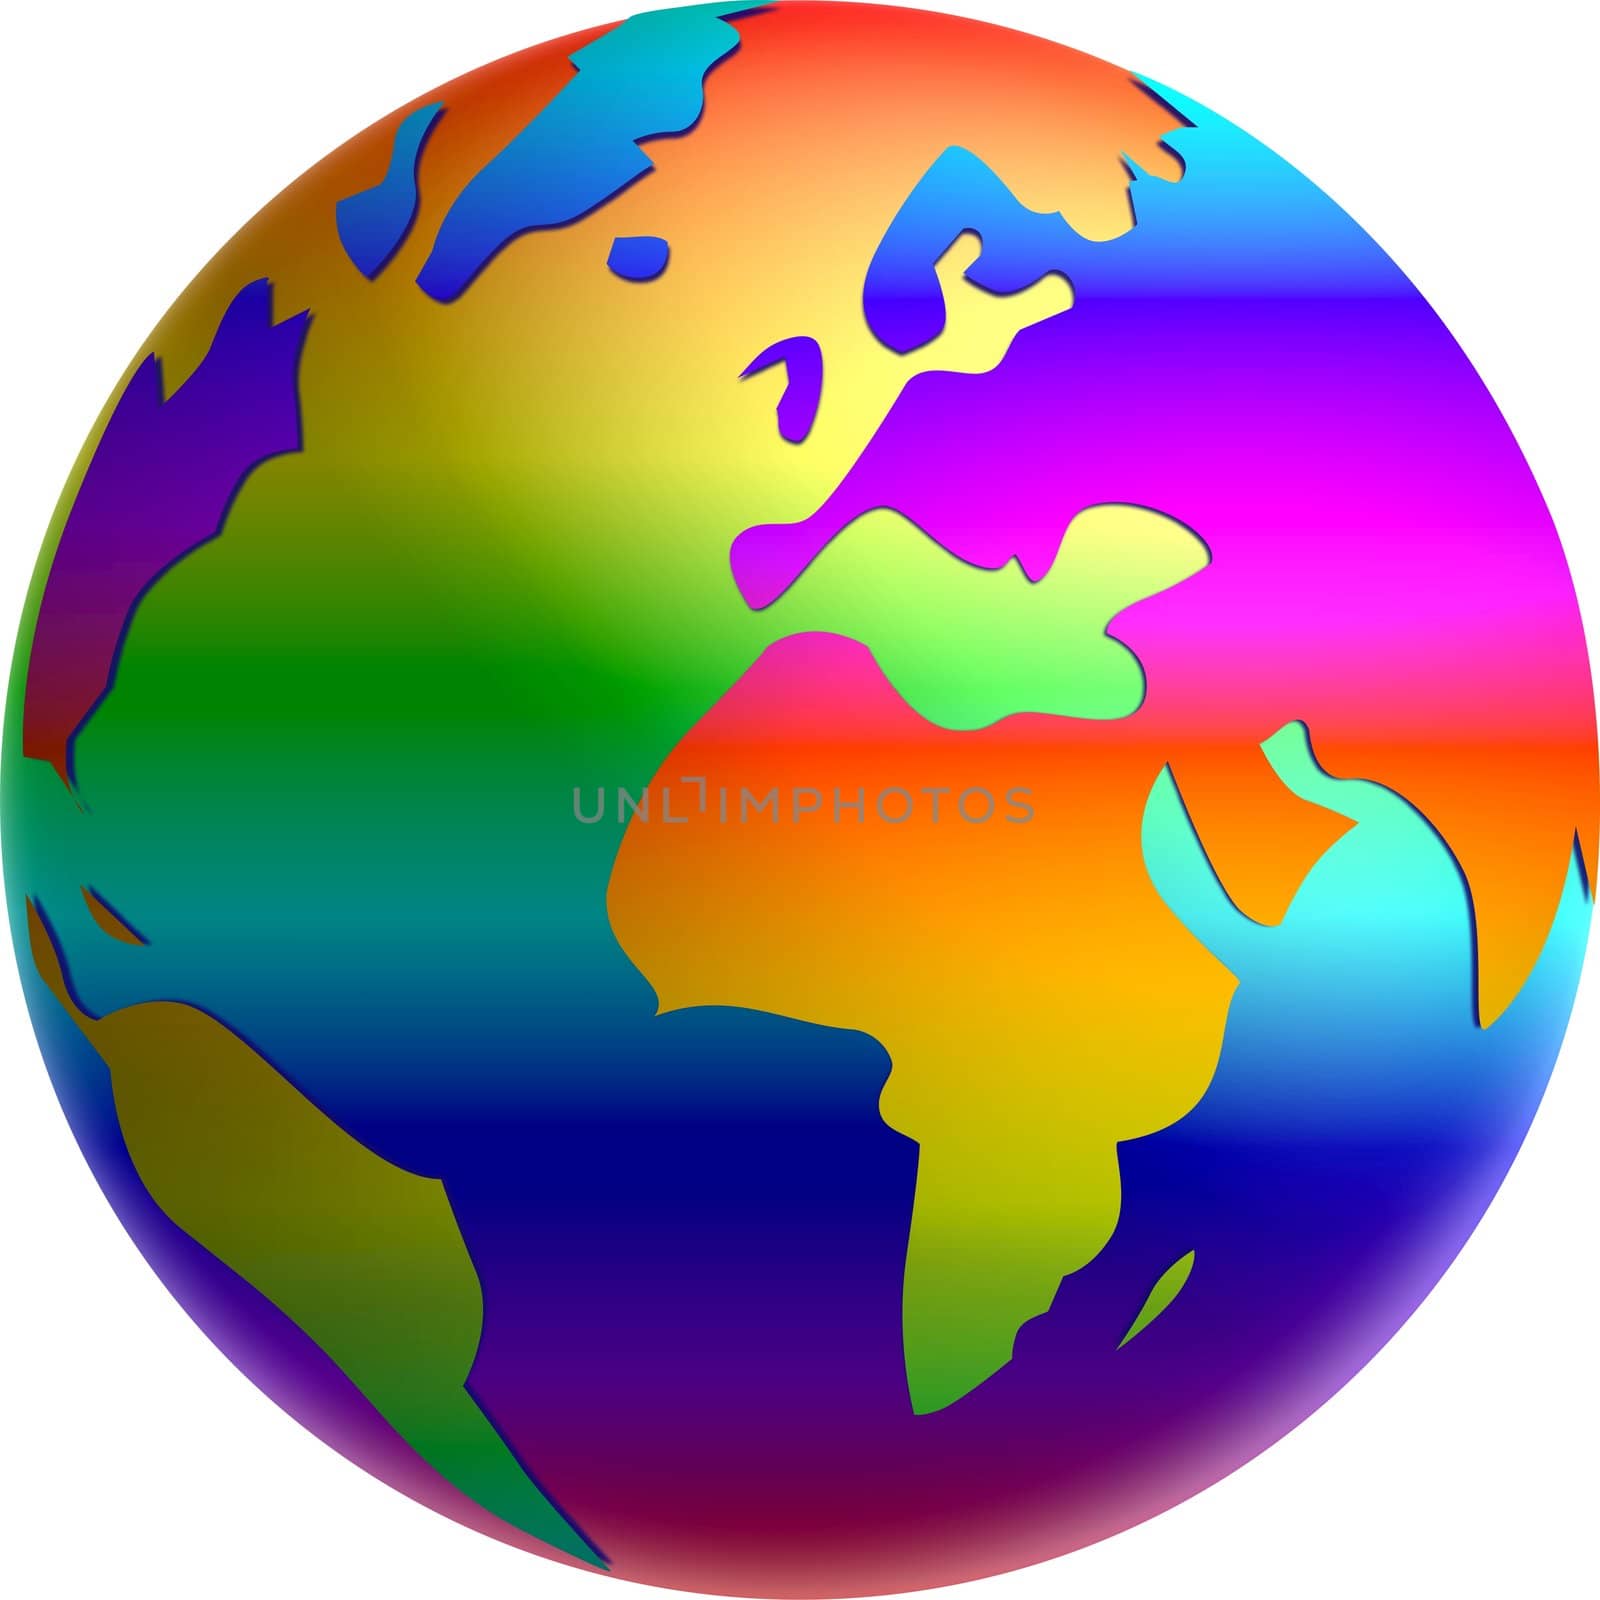 illustration of a rainbow globe - planet earth by peromarketing